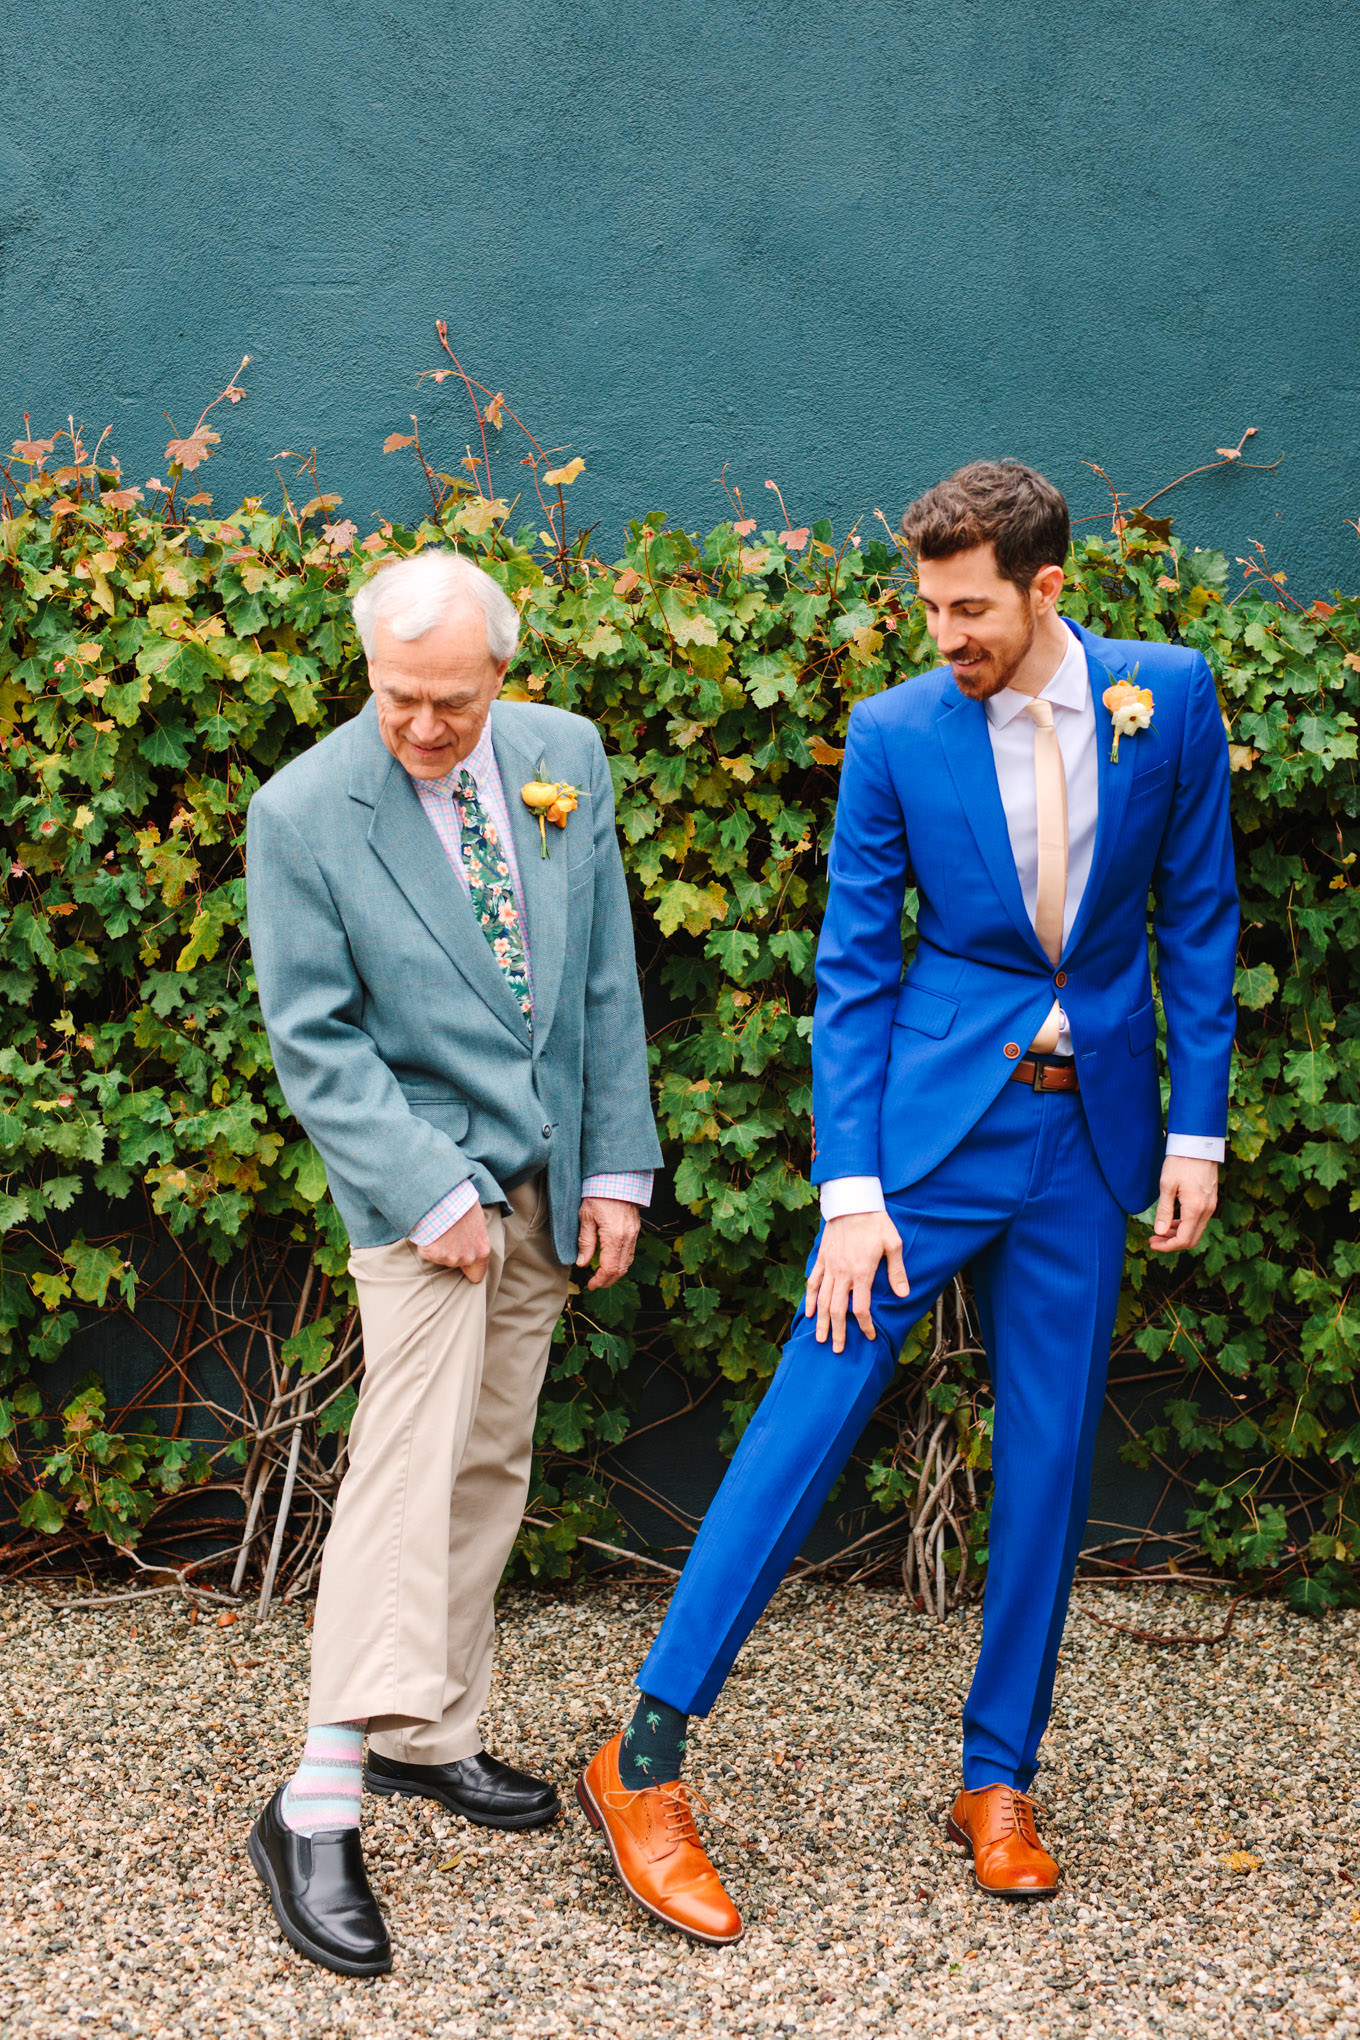 Groom and dad showing off socks | TV inspired wedding at The Fig House Los Angeles | Published on The Knot | Fresh and colorful photography for fun-loving couples in Southern California | #losangeleswedding #TVwedding #colorfulwedding #theknot   Source: Mary Costa Photography | Los Angeles wedding photographer